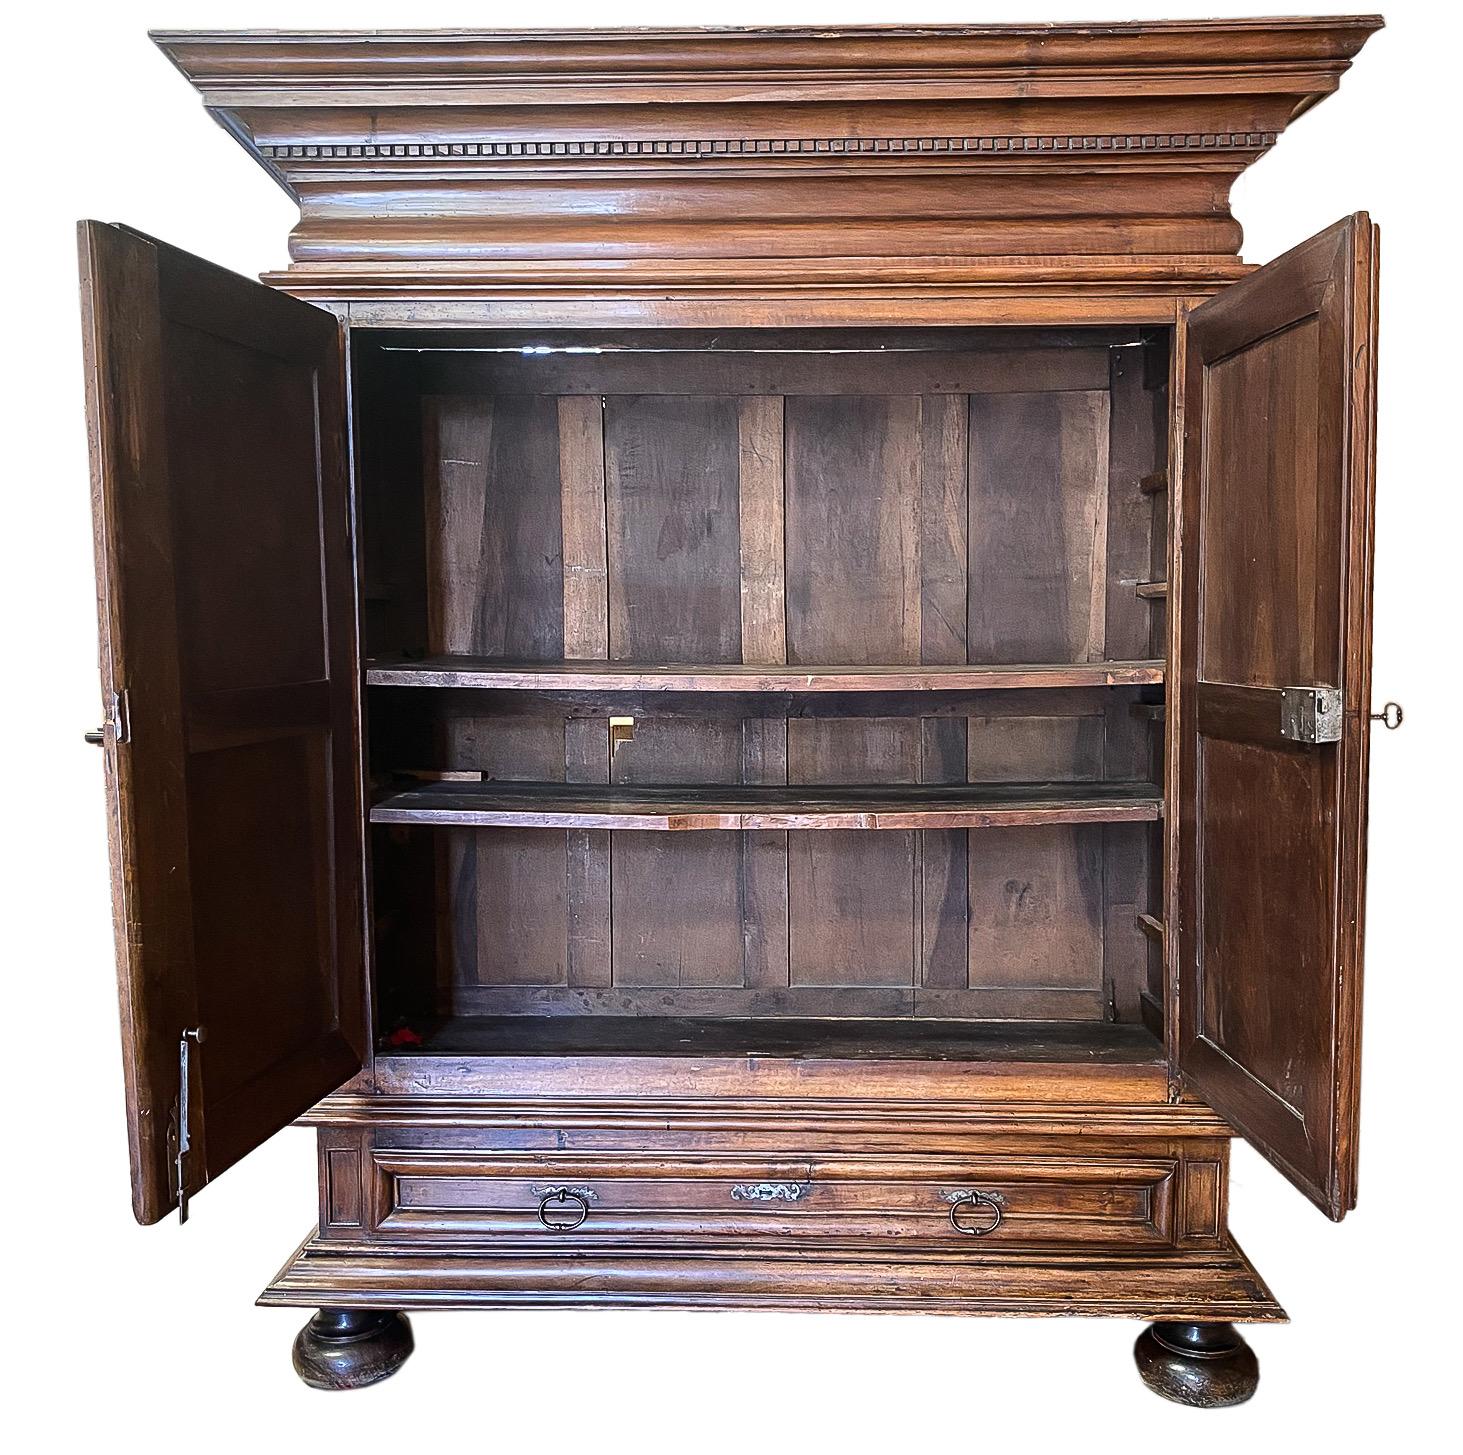 Crafted in Southern France, circa 1820, the large cabinet is built in three sections, the upper section features a wide crown at the top. Two heavy doors decorated with high relief carved diamond shape geometric designs revealing two inside shelves